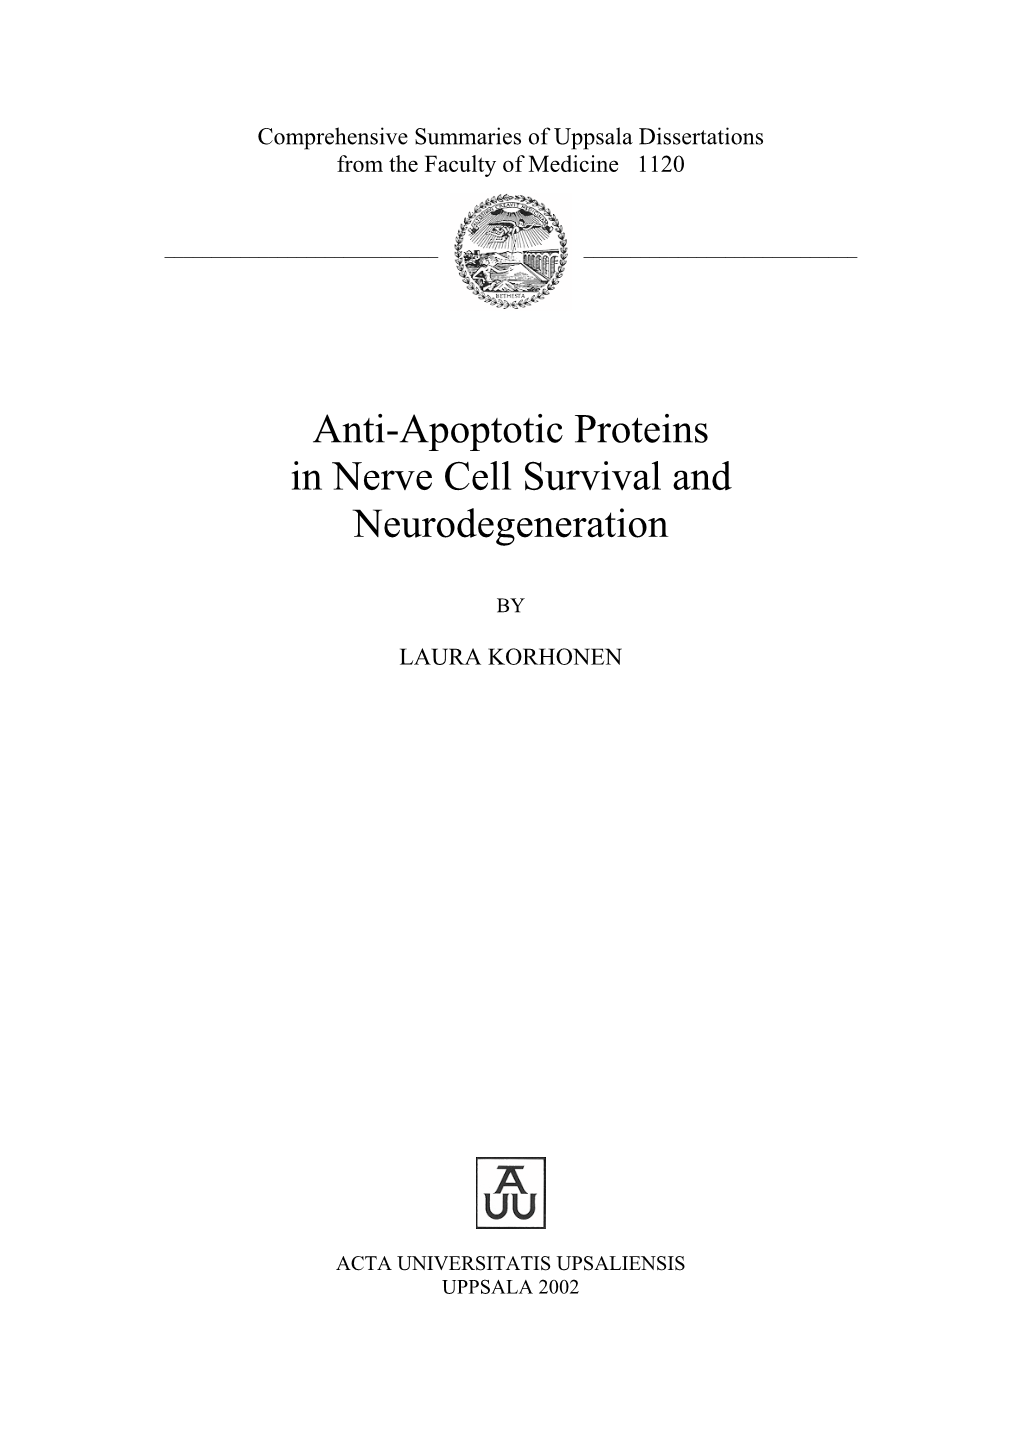 Anti-Apoptotic Proteins in Nerve Cell Survival and Neurodegeneration